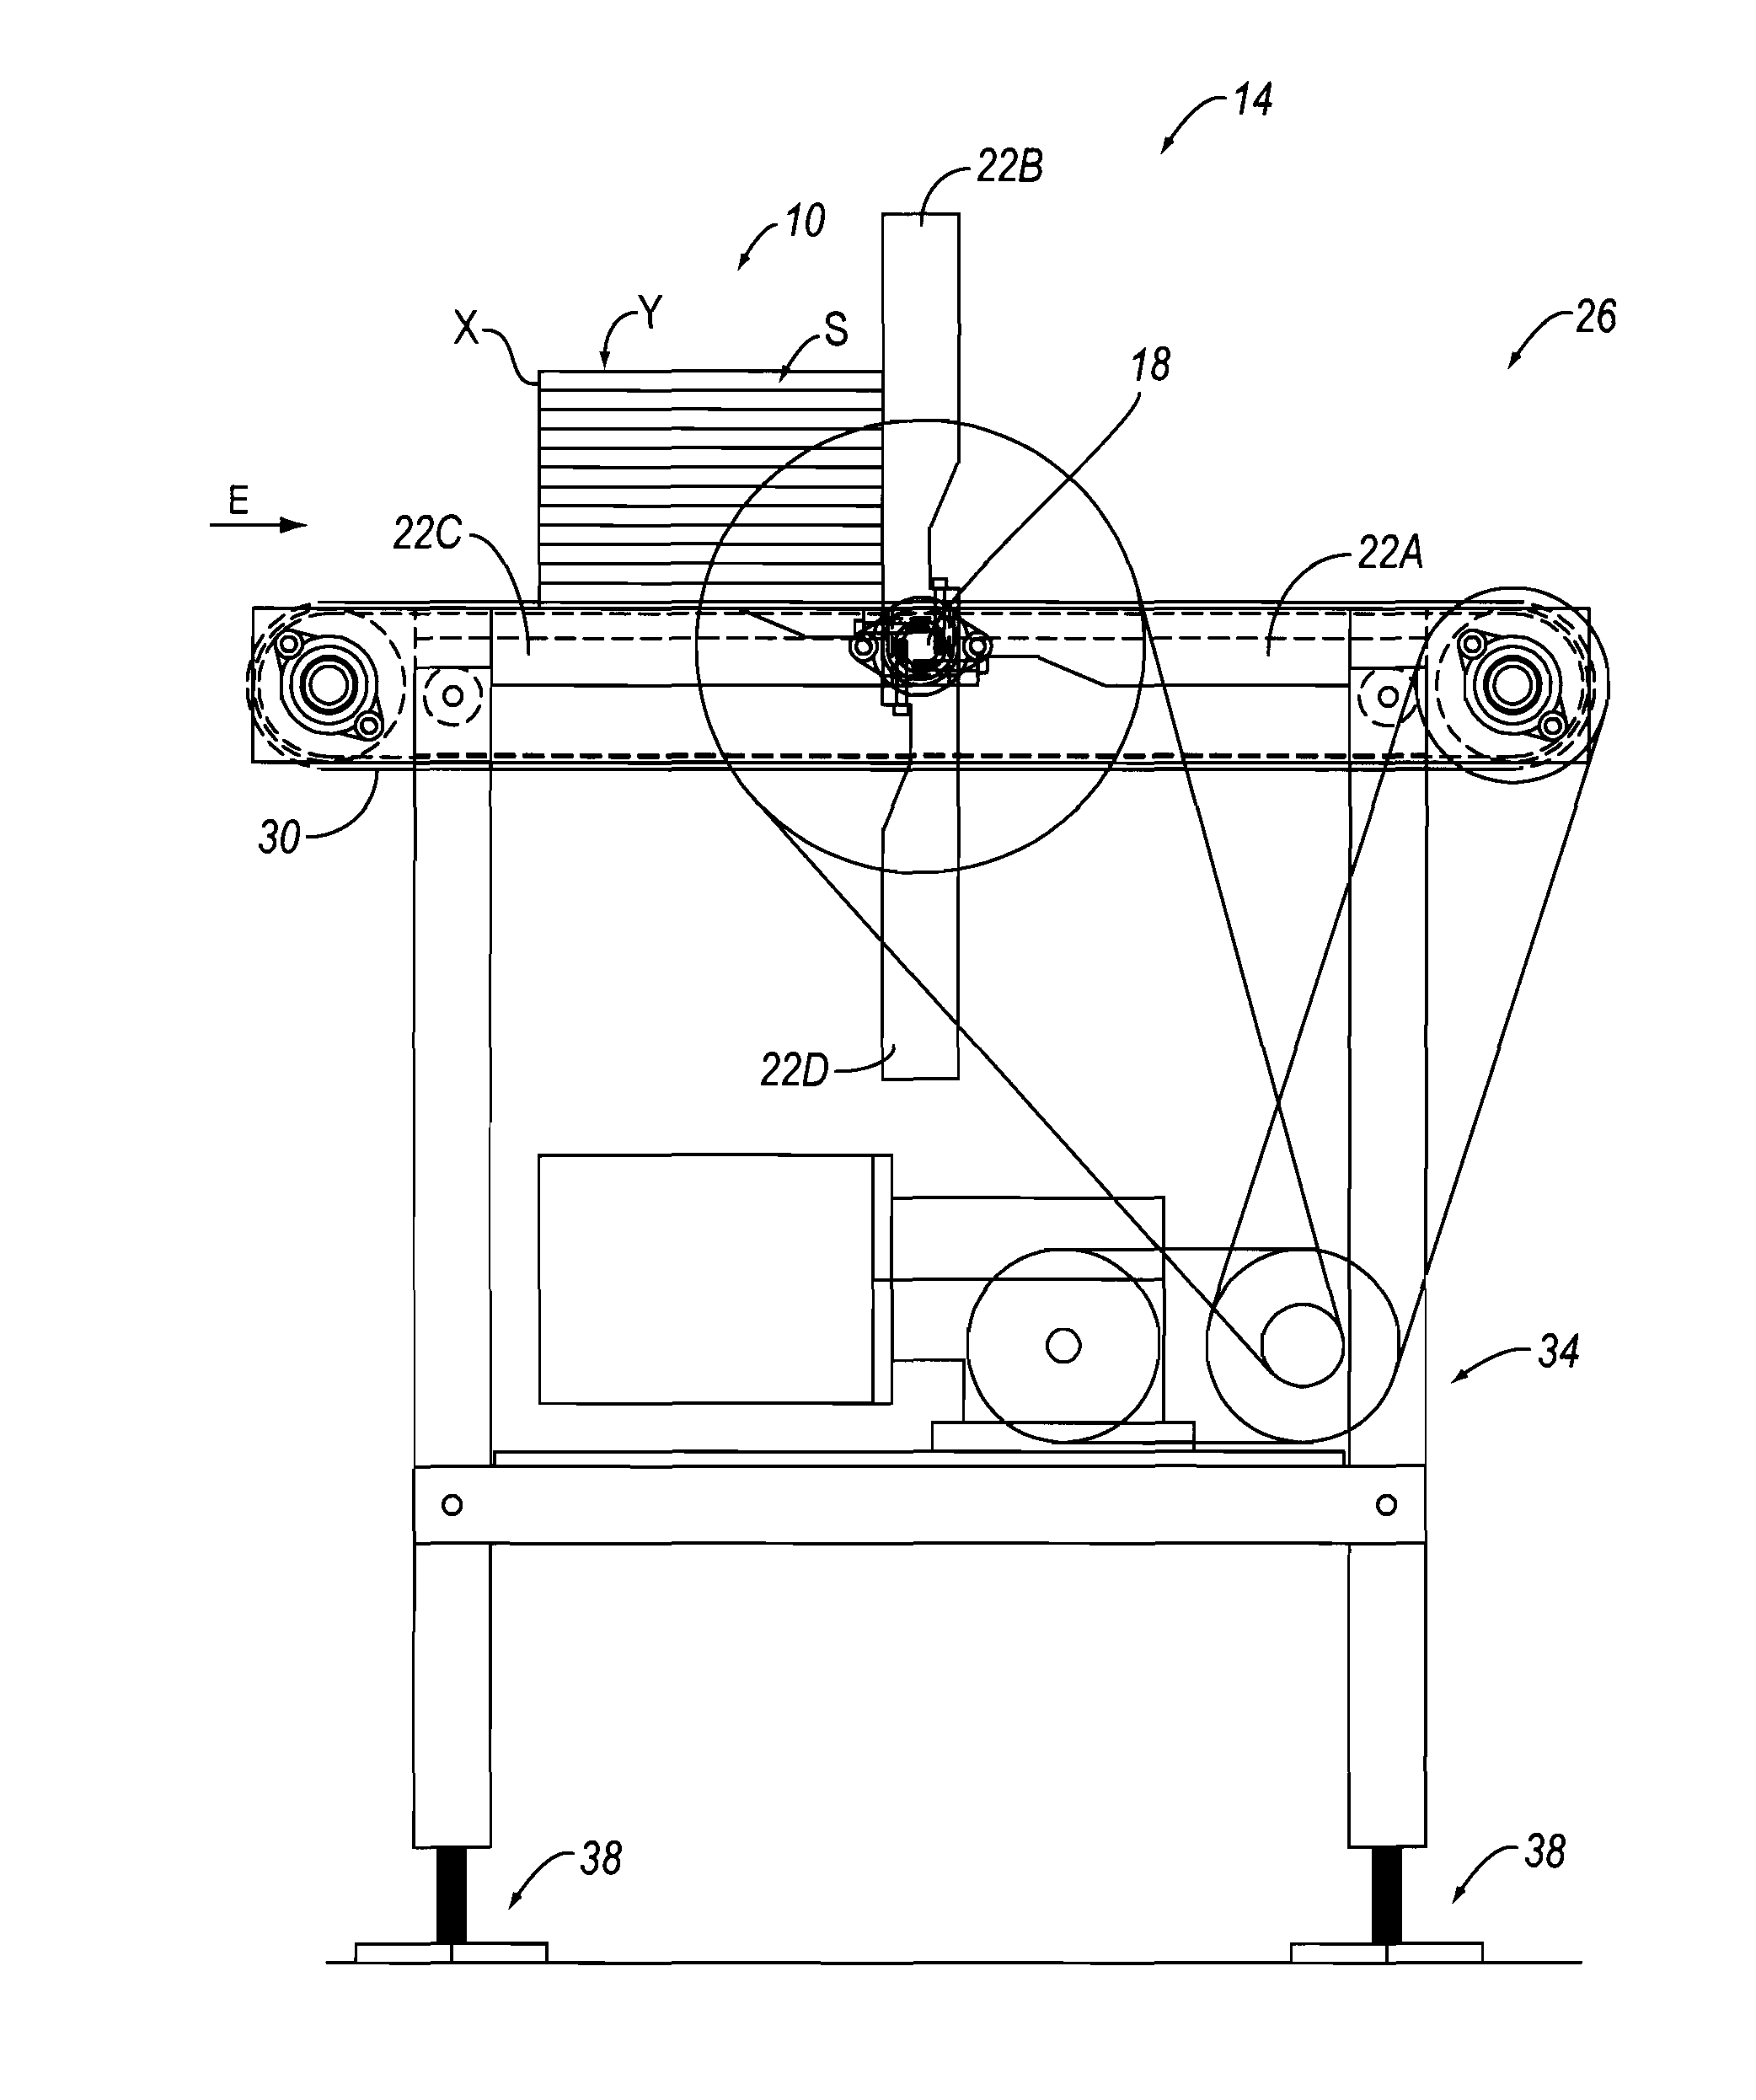 Book processing line inversion systems and methods